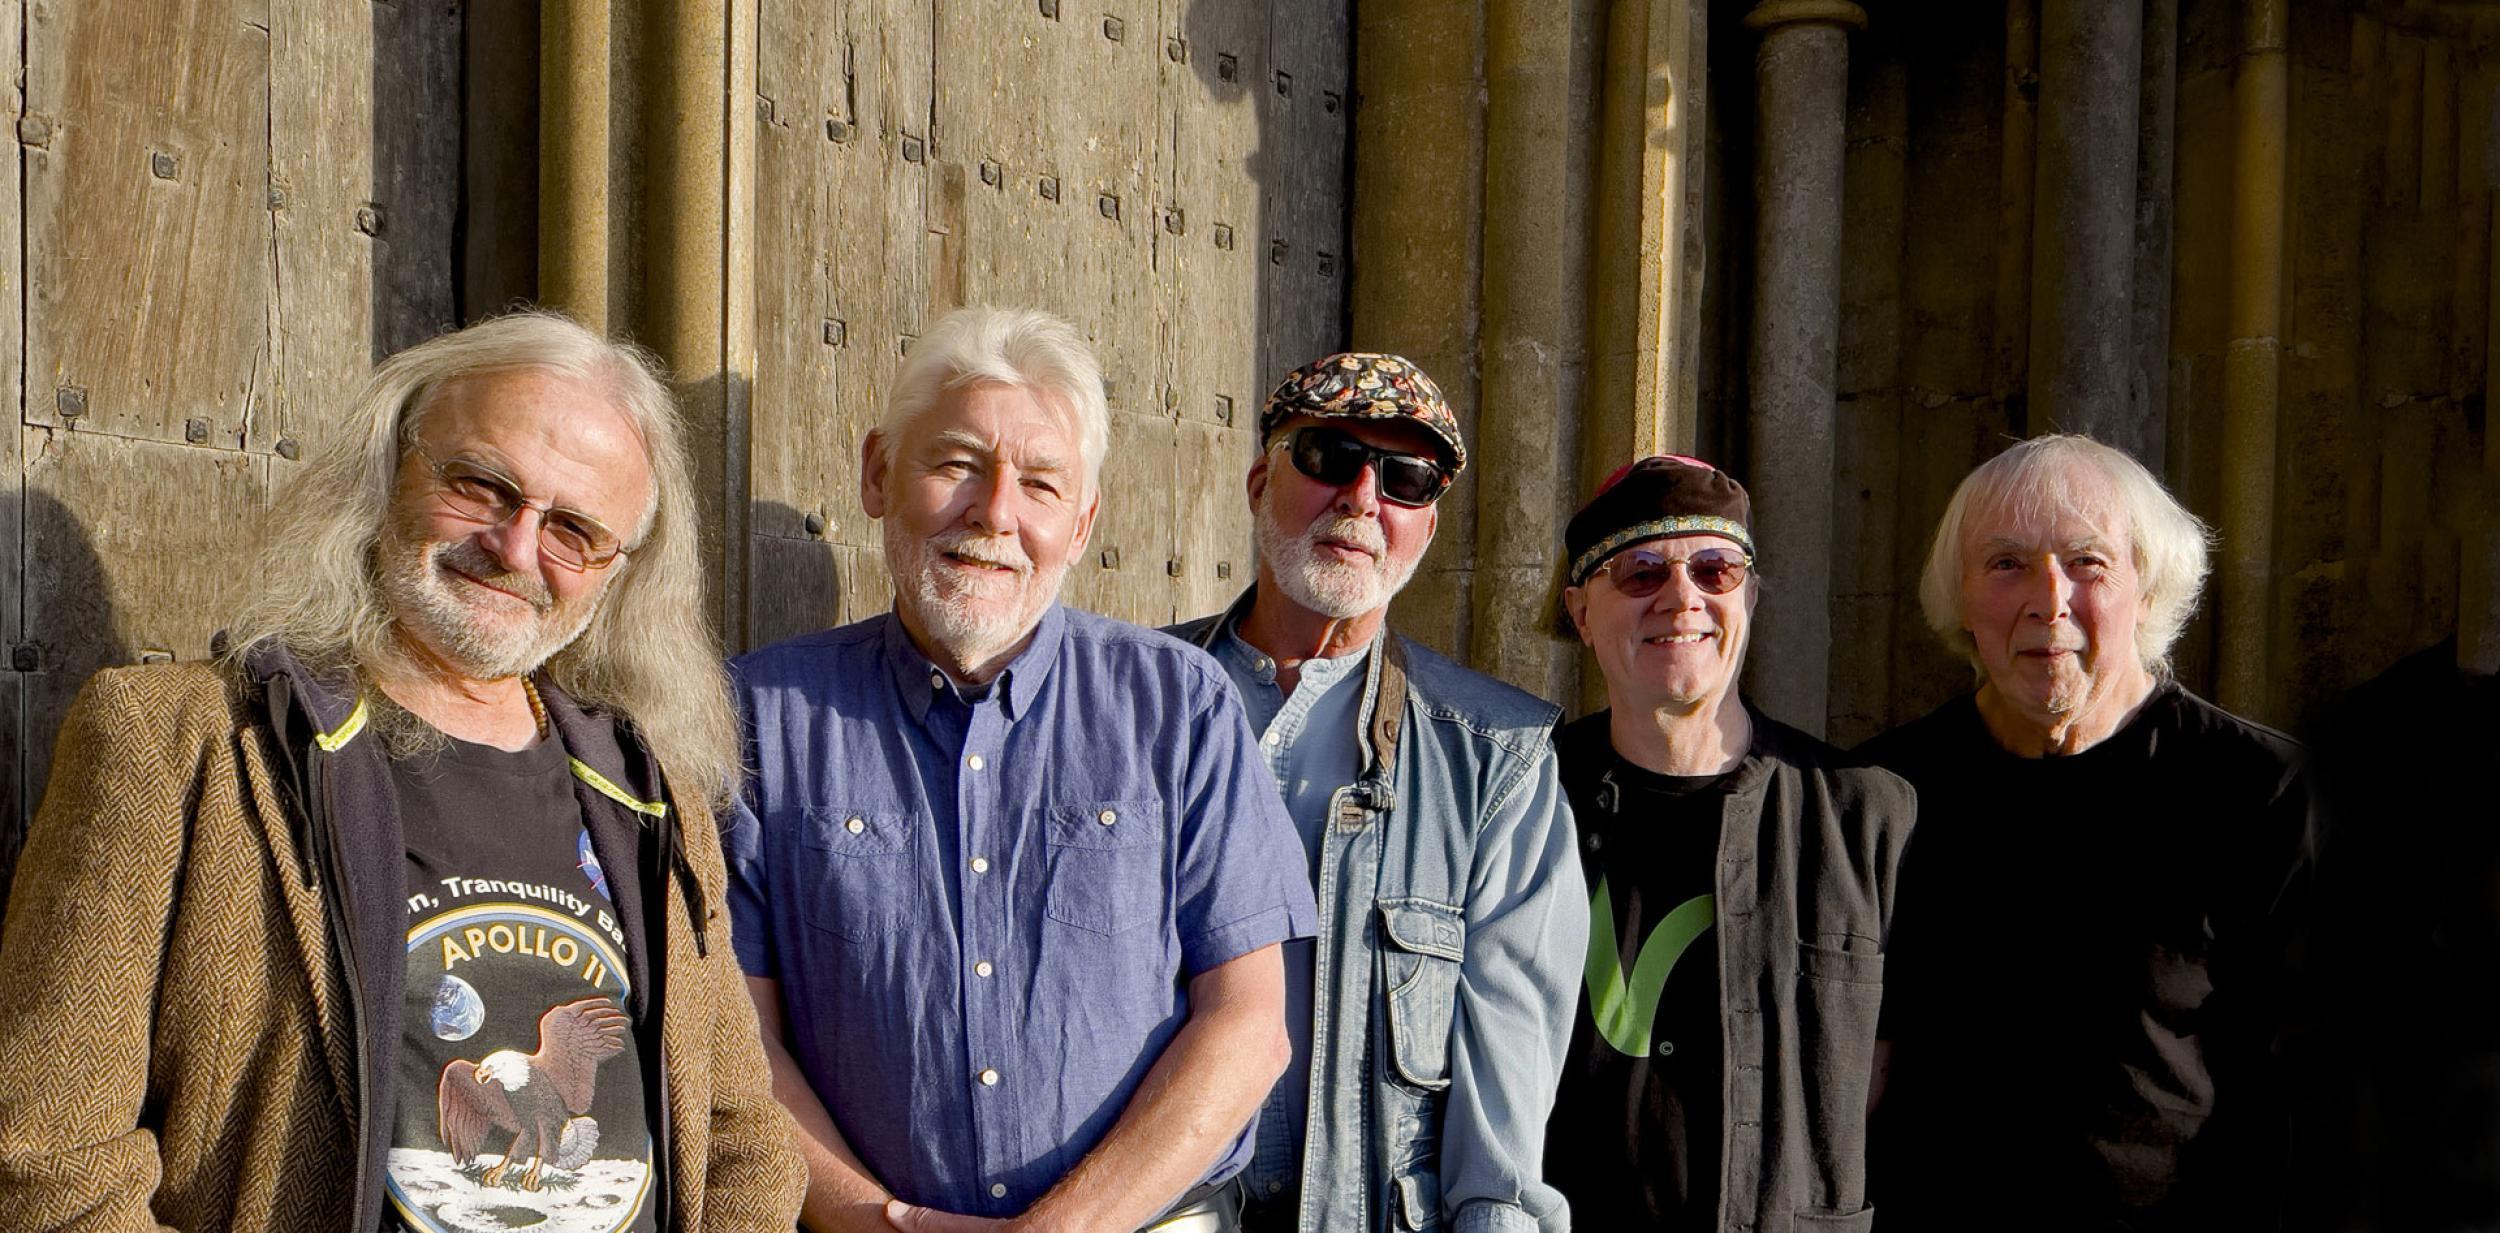 Fairport Convention band members